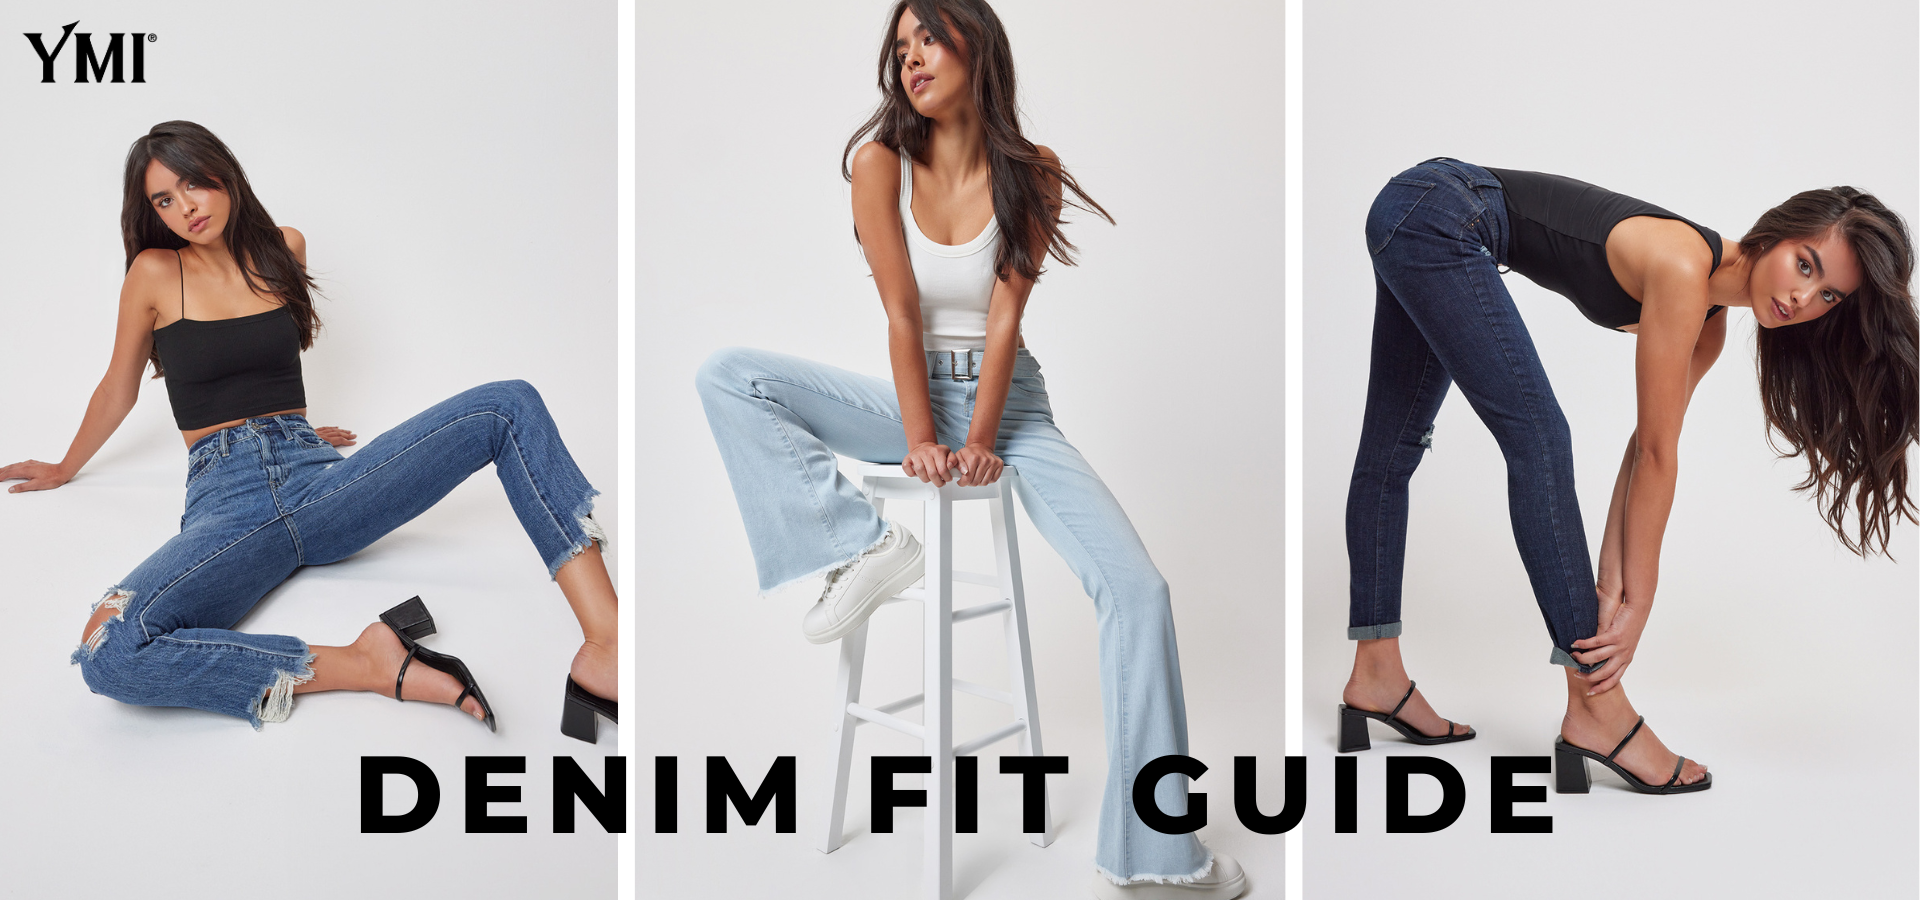 YMI Jeans: The Denim Fit Guide for Effortless Style and Comfort – YMI JEANS